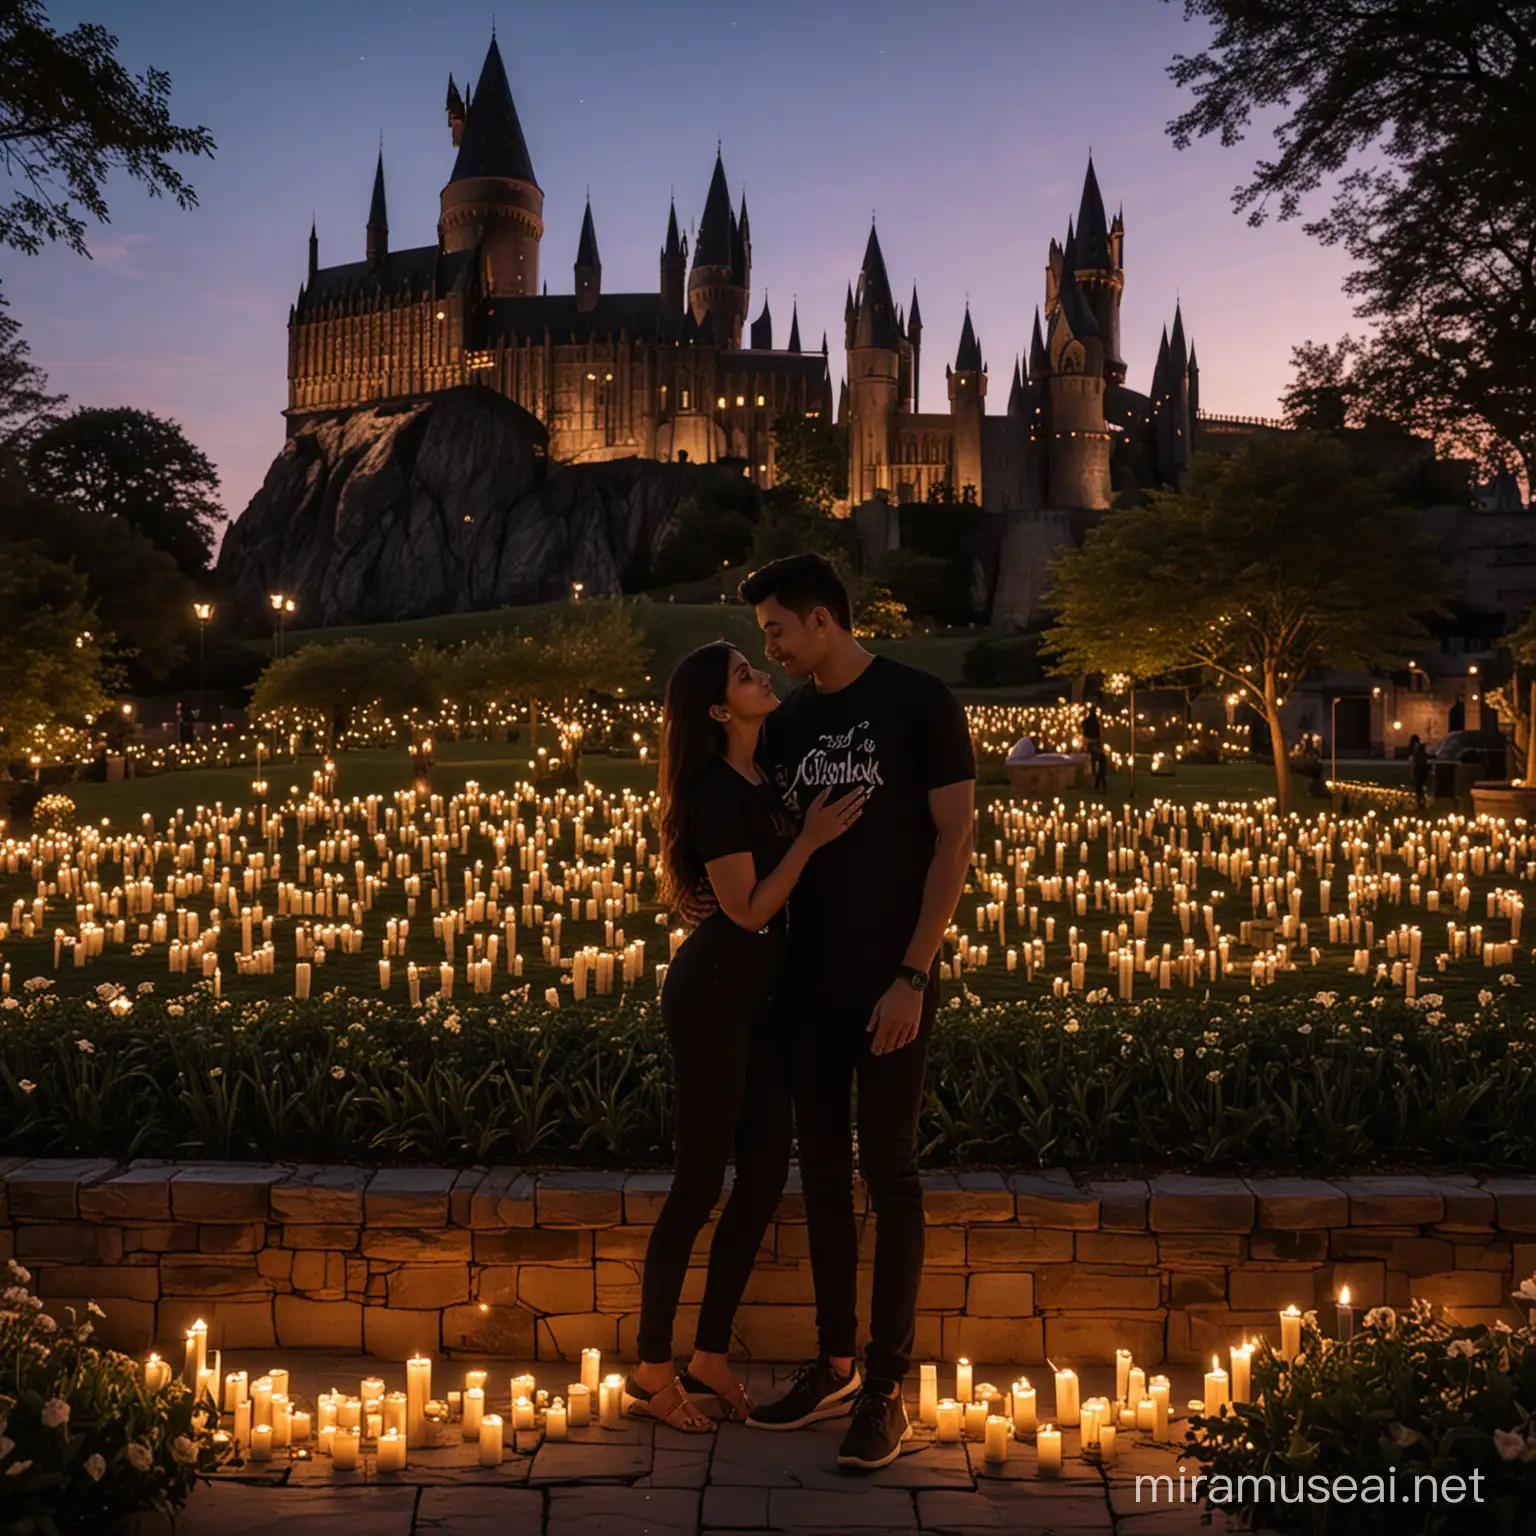 The image depicts Maharshi and Yashika standing in a beautiful formal garden at twilight. Maharshi is wearing a black t-shirt with his name "Maharshi" written stylishly across the chest, holding Yashika's hand as they lean in for a kiss. Yashika is also wearing a t-shirt with her name "Yashika" elegantly displayed. In the background, there's a silhouette of Hogwarts castle, illuminated by the fading light of the evening sky. Floating candles hover above them, casting a soft glow, and a magic wand rests on a nearby stone bench.